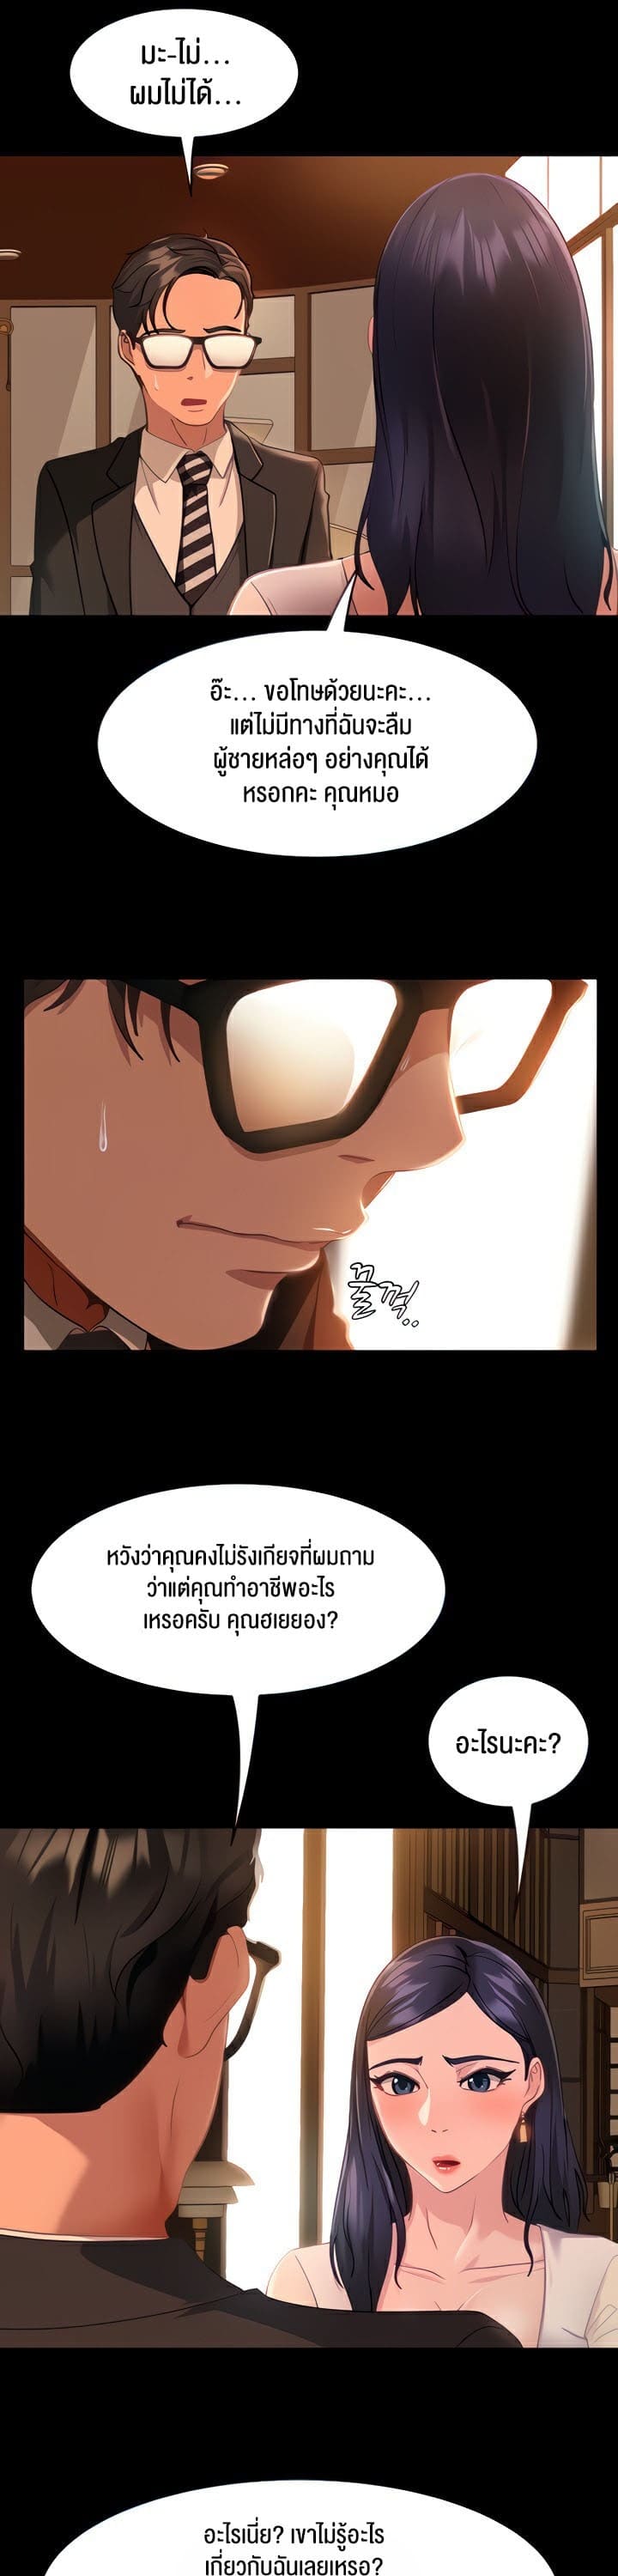 Marriage Agency Review ตอนที่ 4 ภาพ 5